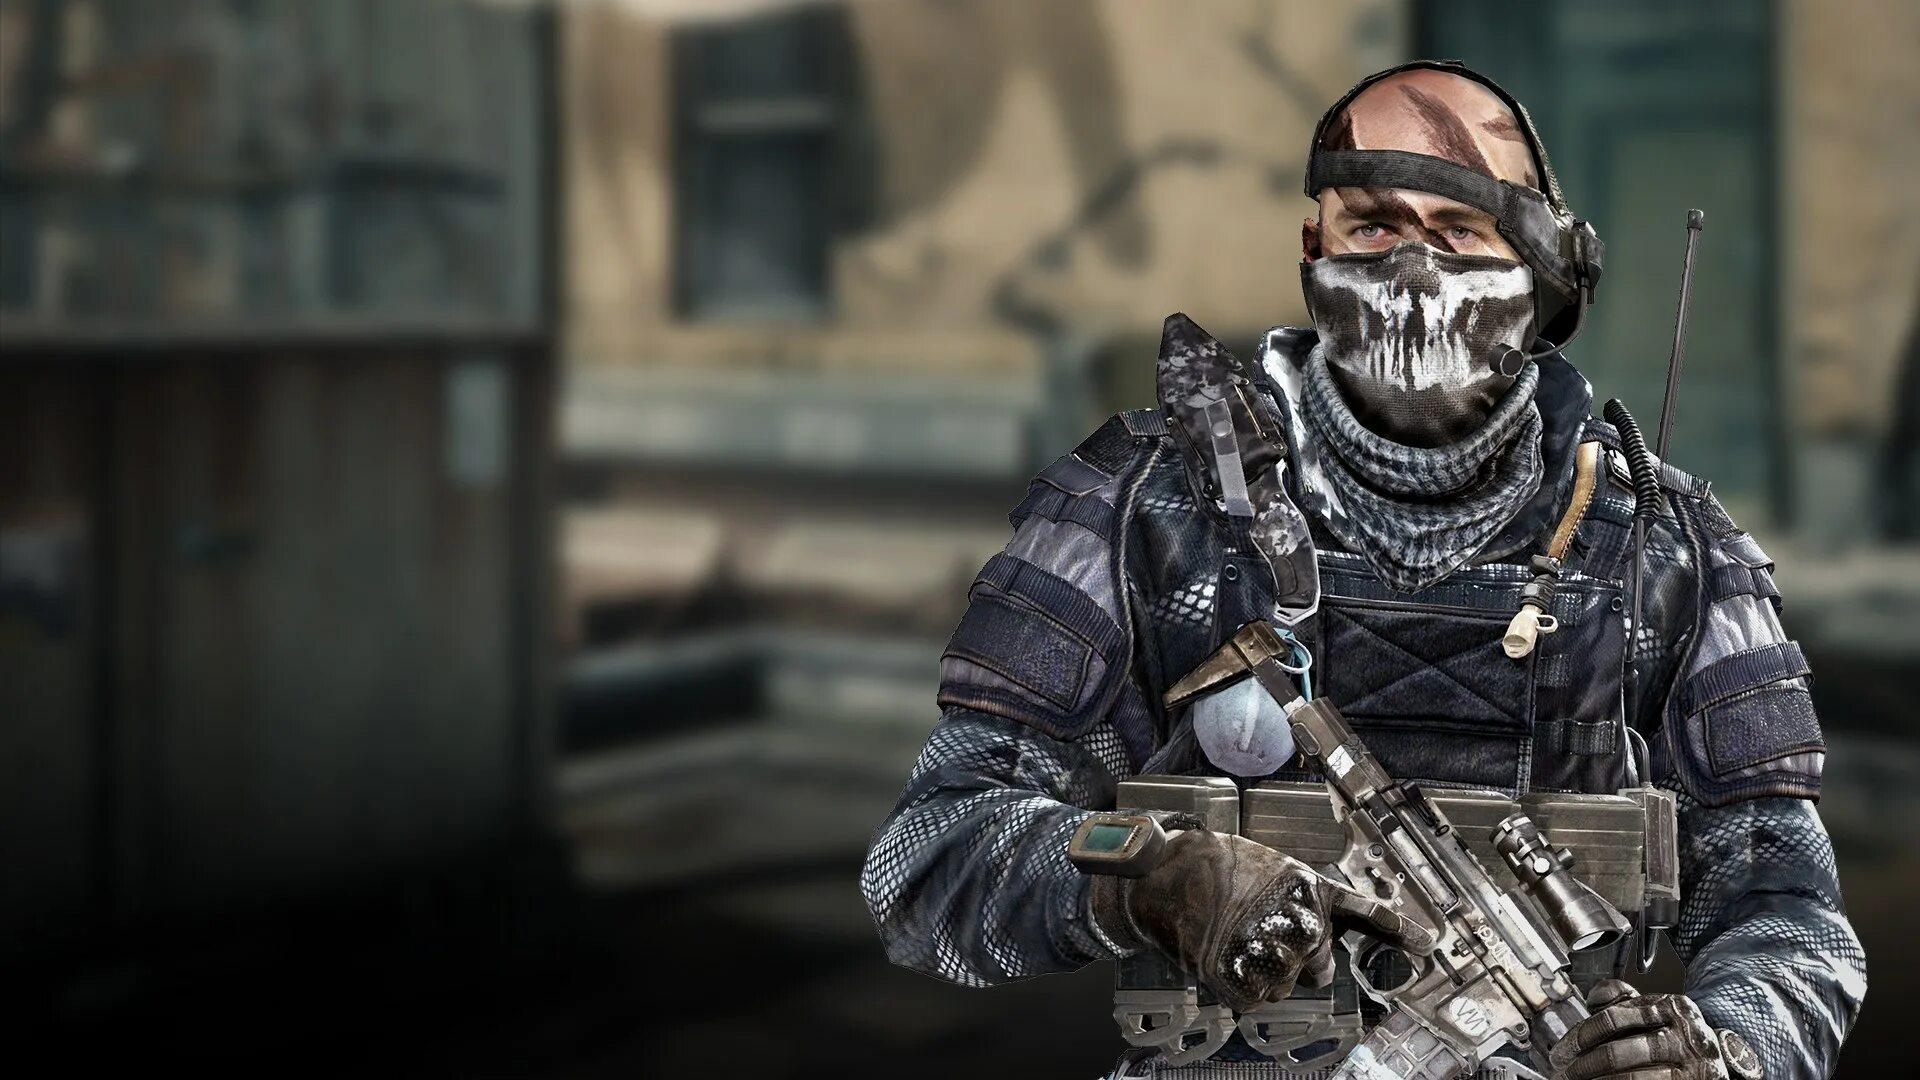 Гоуст Call of Duty. Call of Duty Ghosts гоуст. Меррик Call of Duty. Калл оф дьюти сайт